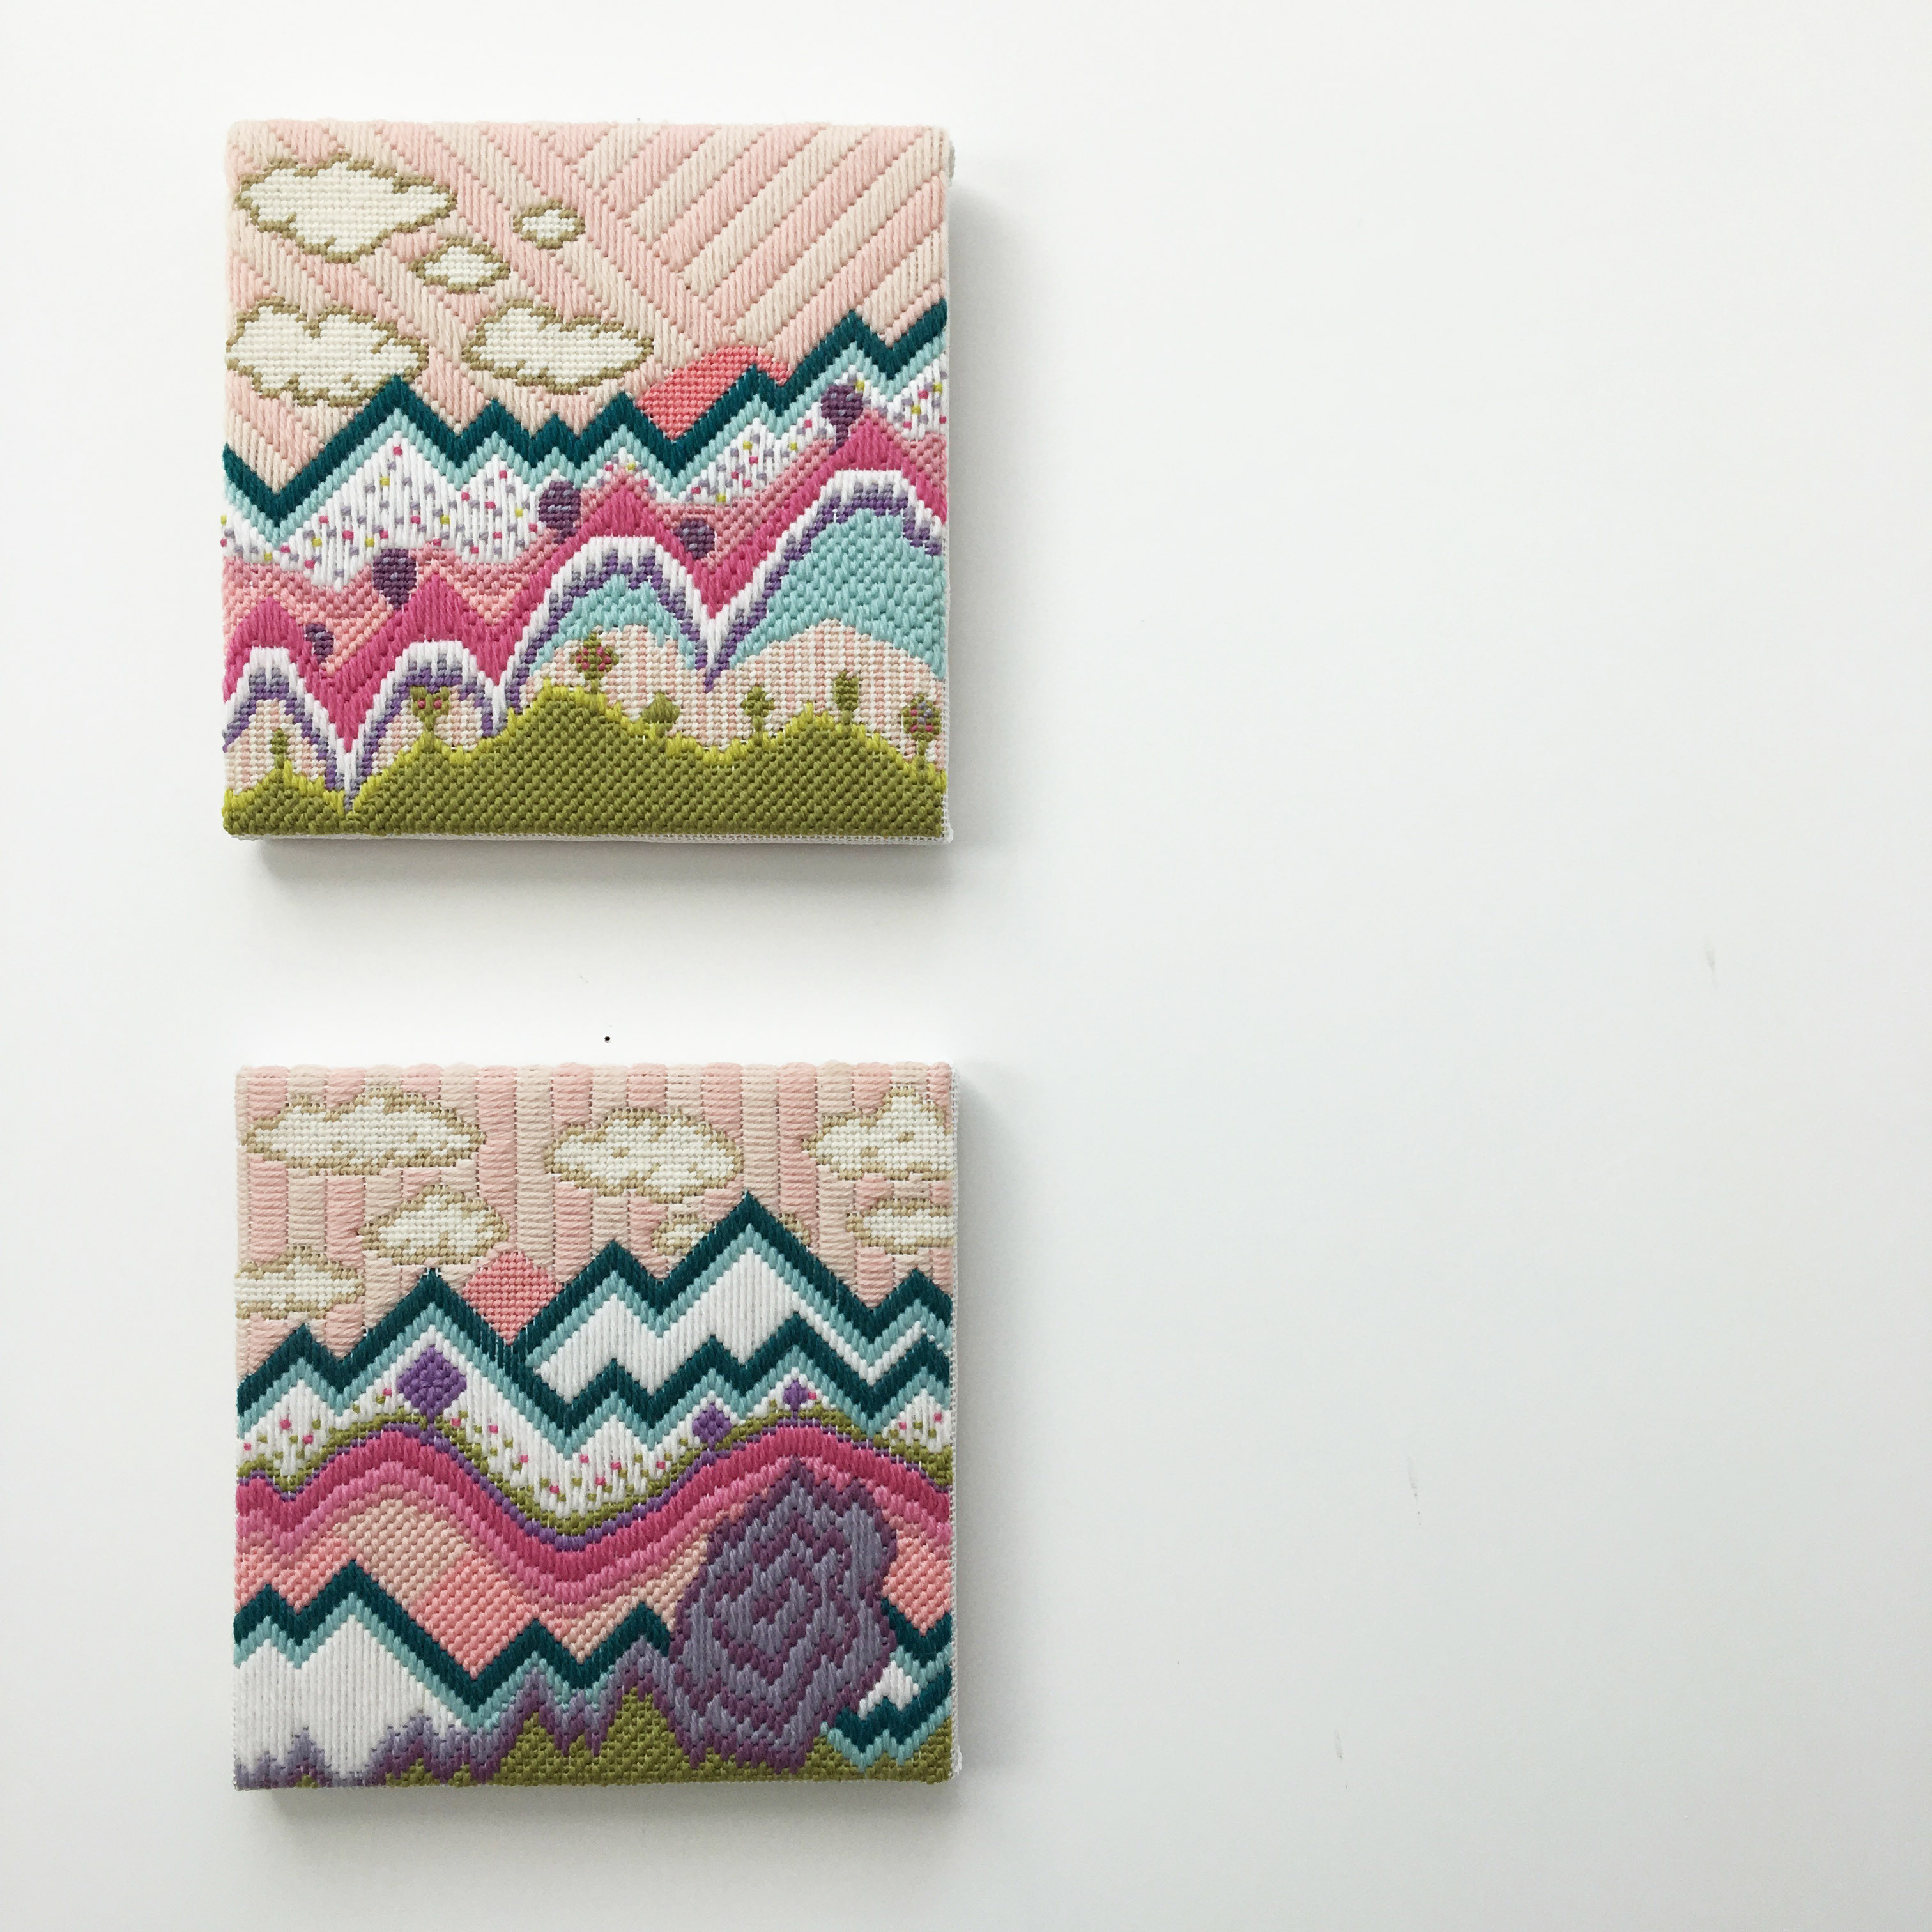 Zoe Gilbertson: Leonora's Mountains, 2018, Tapestry canvas, tapestry wool using Bargello and other improvised stitches